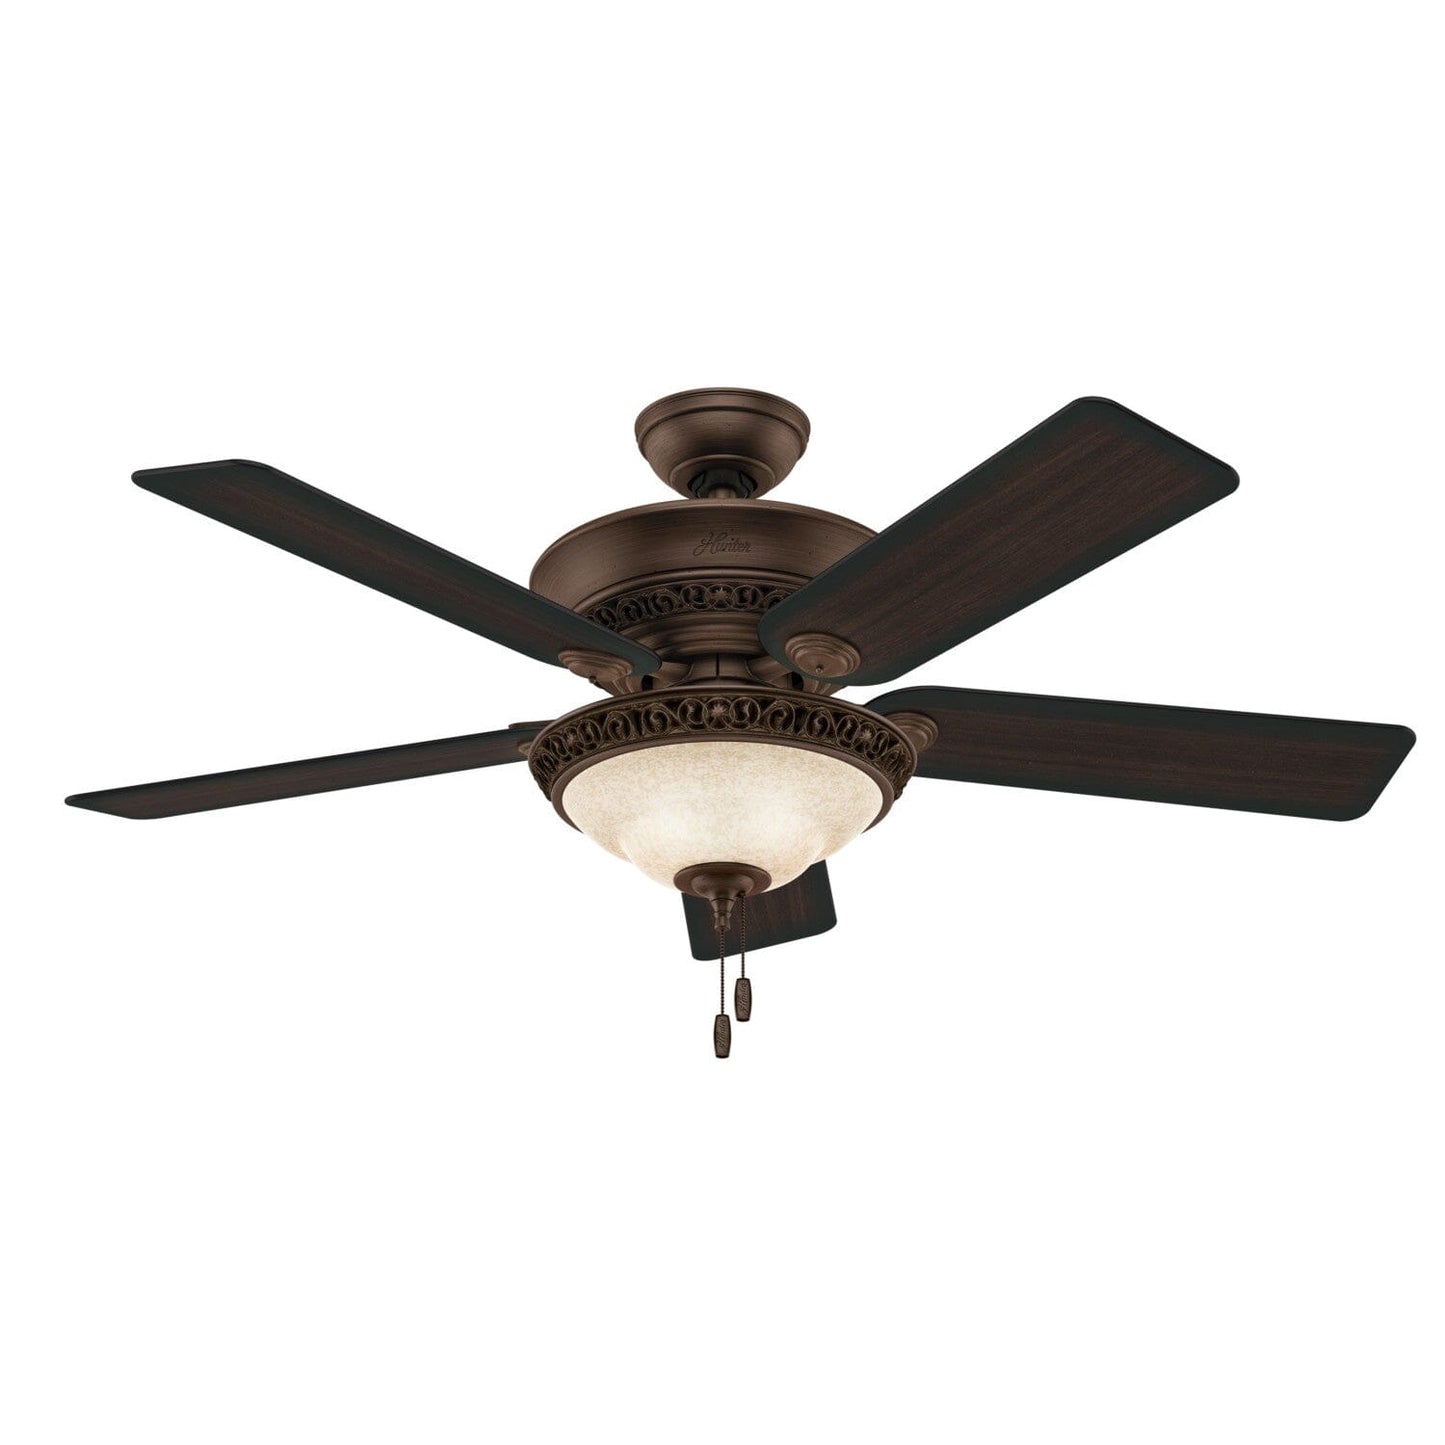 Italian Countryside with Light 52 inch Ceiling Fans Hunter P.A. Cocoa - Aged Barnwood 